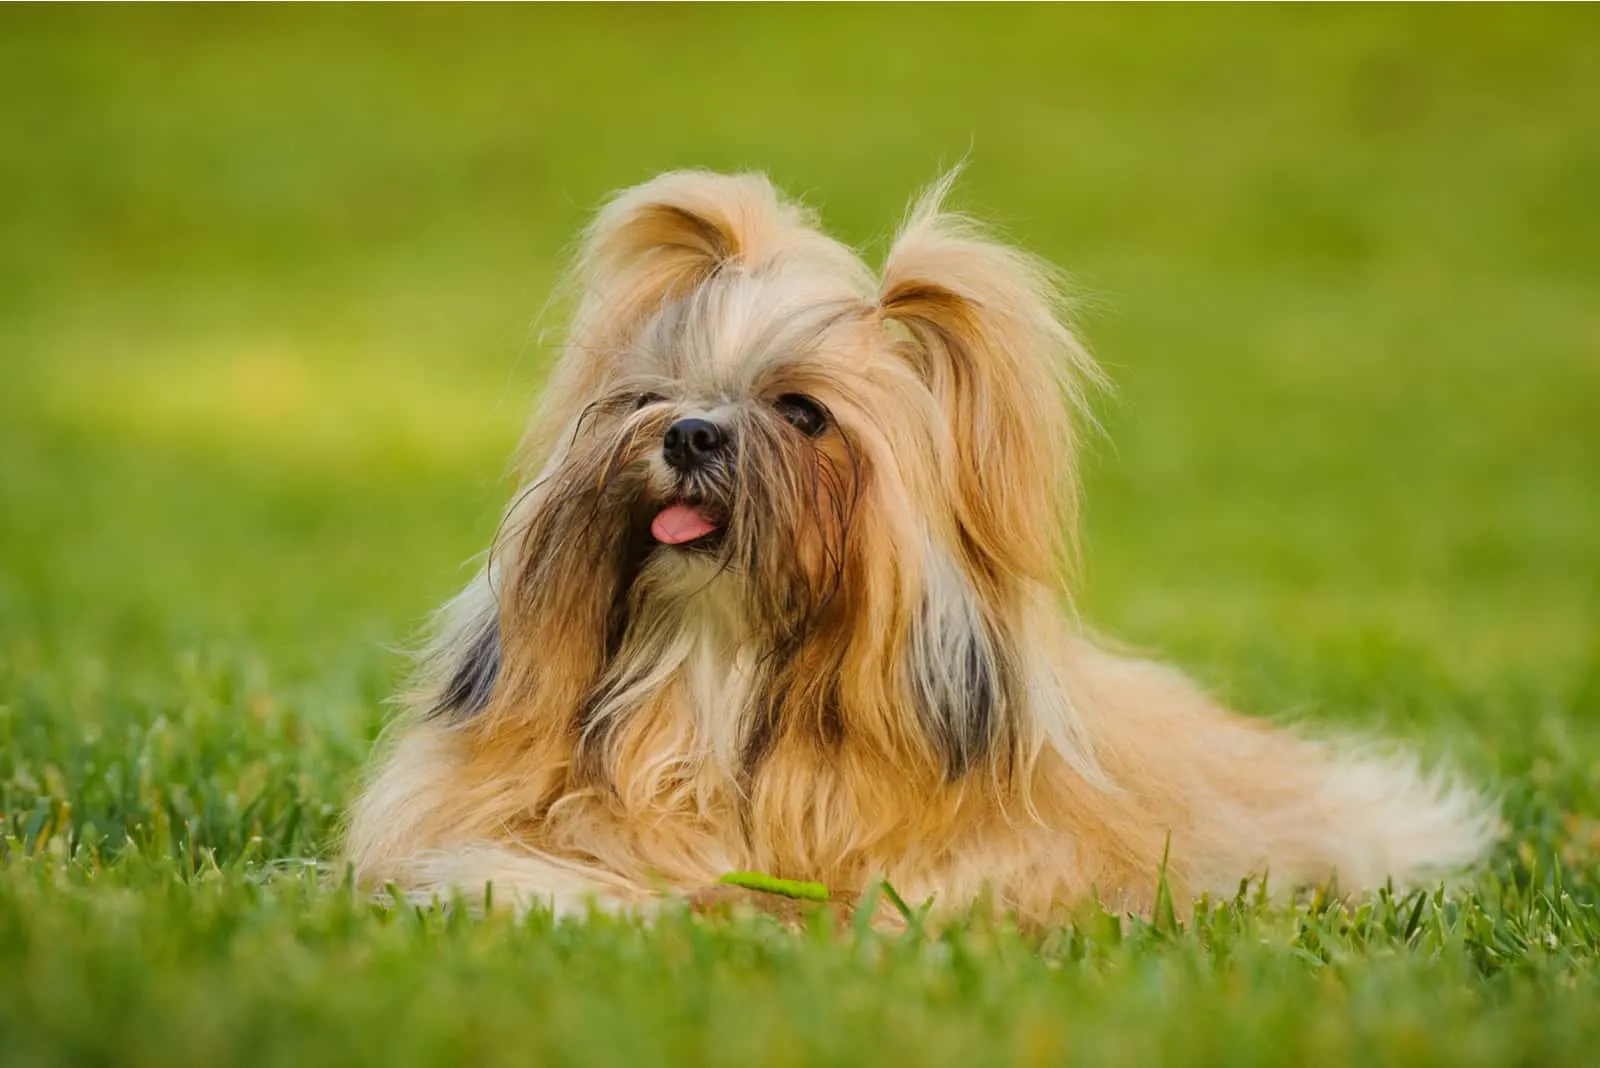 the adorable Shih Tzu is lying on the grass